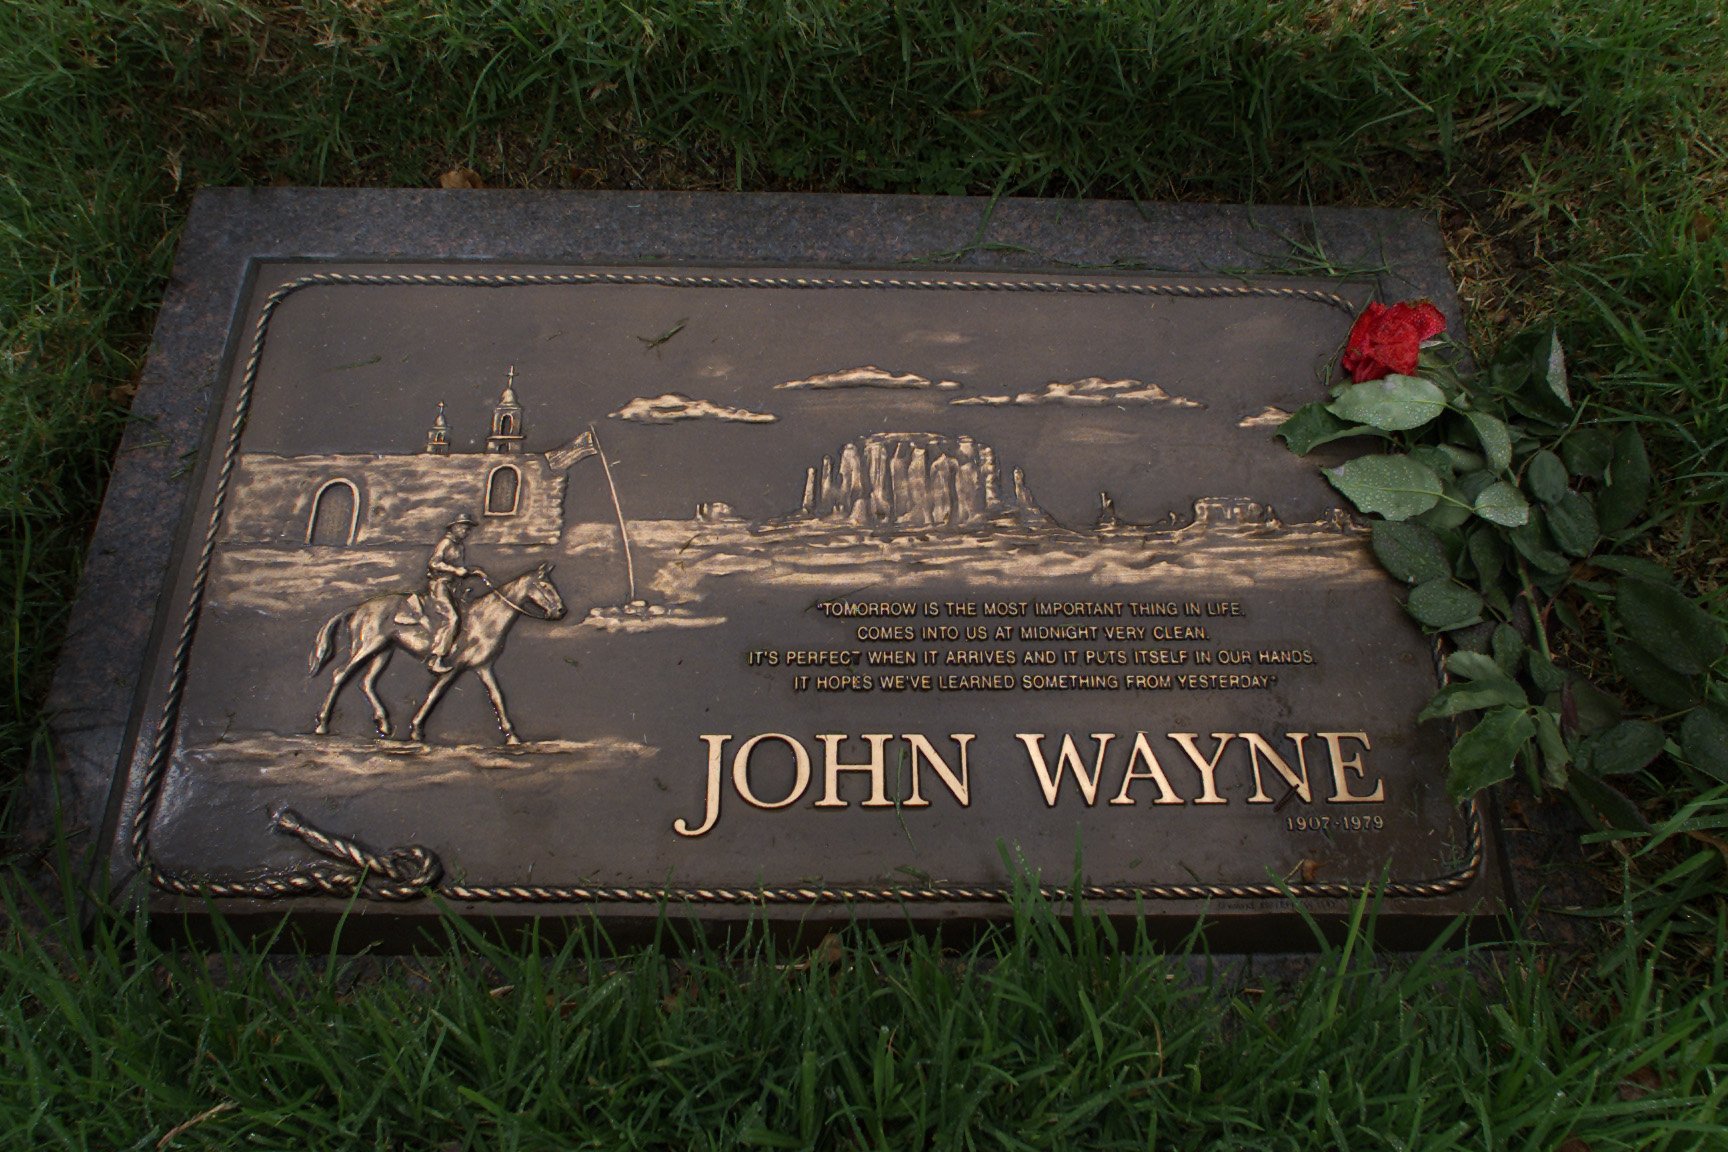 One of the most famous gravesites in Orange County is that of John Wayne, found with a fresh rose on the headstone at Pacific View Memorial Park in Newport Beach. | Source: Getty Images